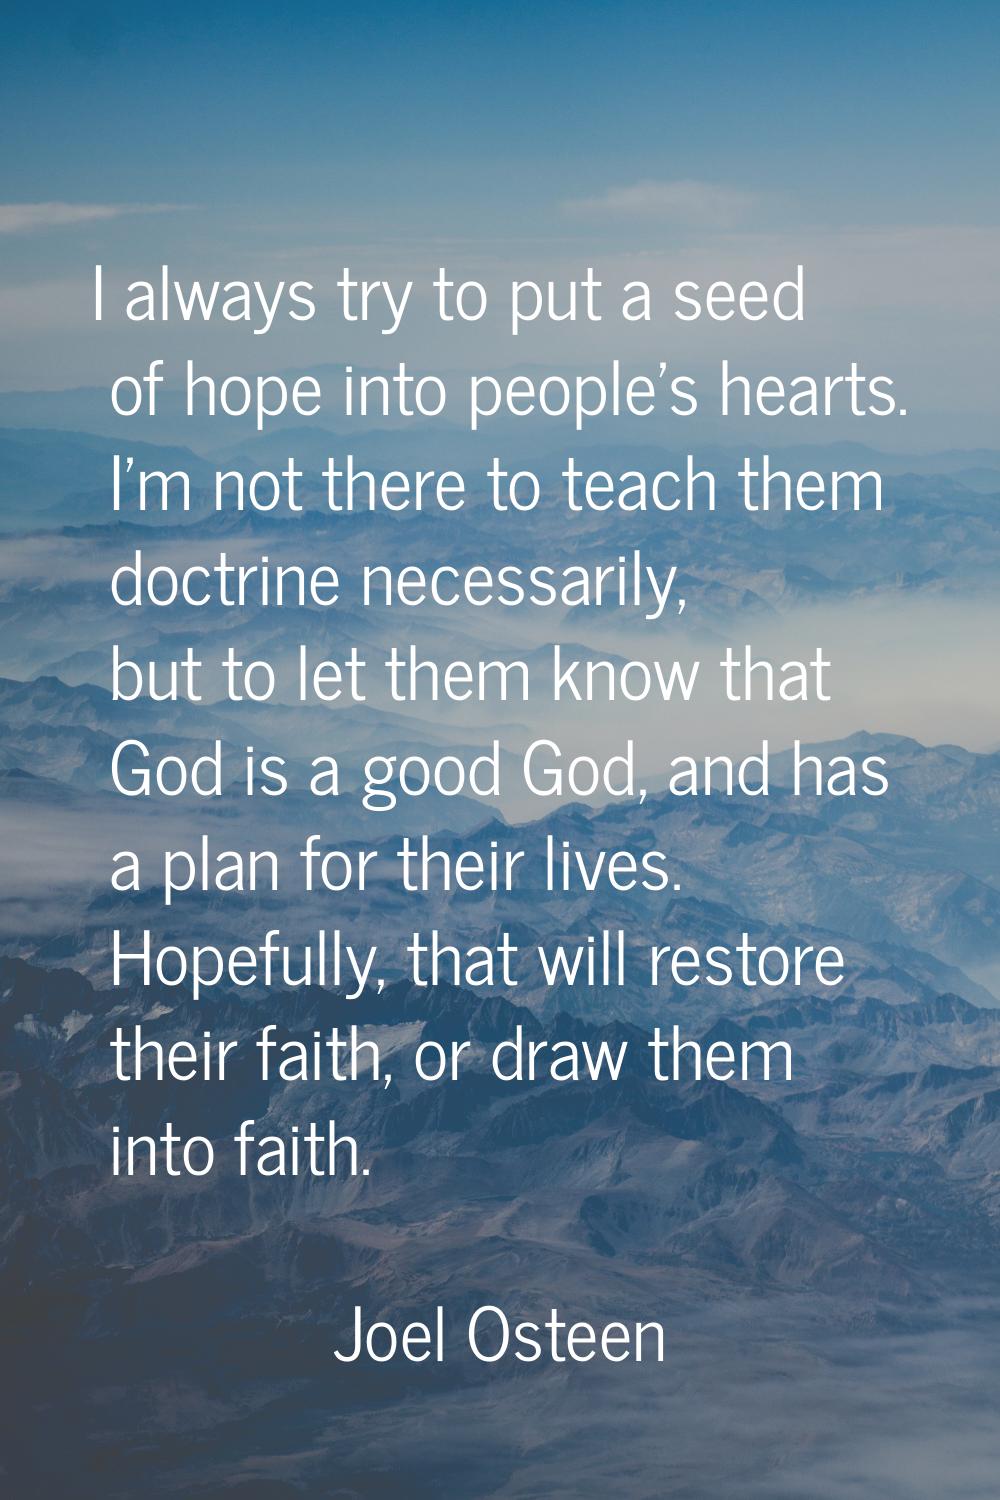 I always try to put a seed of hope into people's hearts. I'm not there to teach them doctrine neces